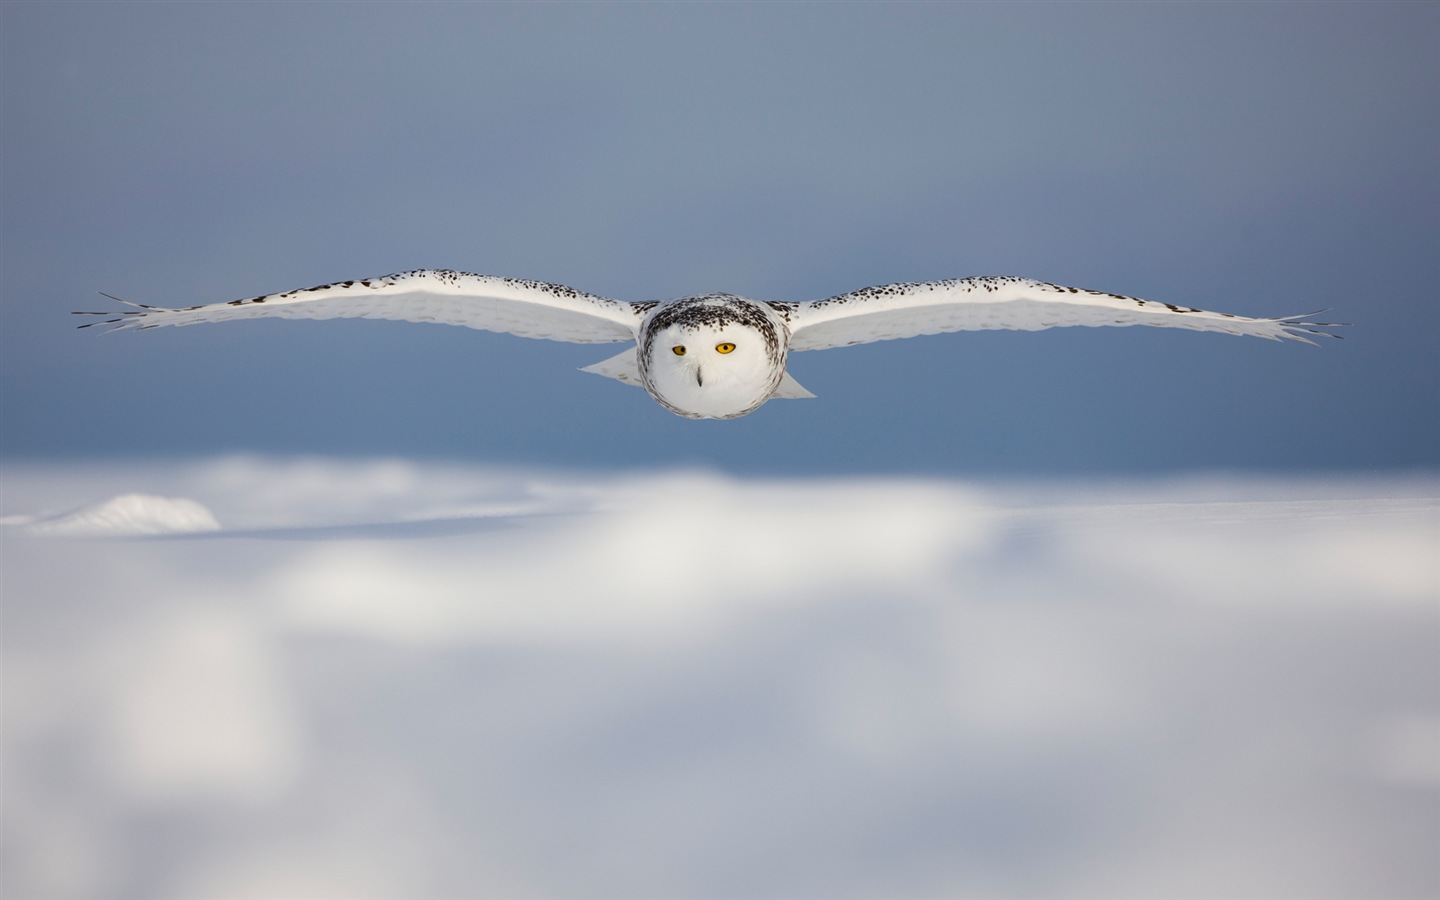 Windows 8 Wallpapers: Arctic, the nature ecological landscape, arctic animals #12 - 1440x900